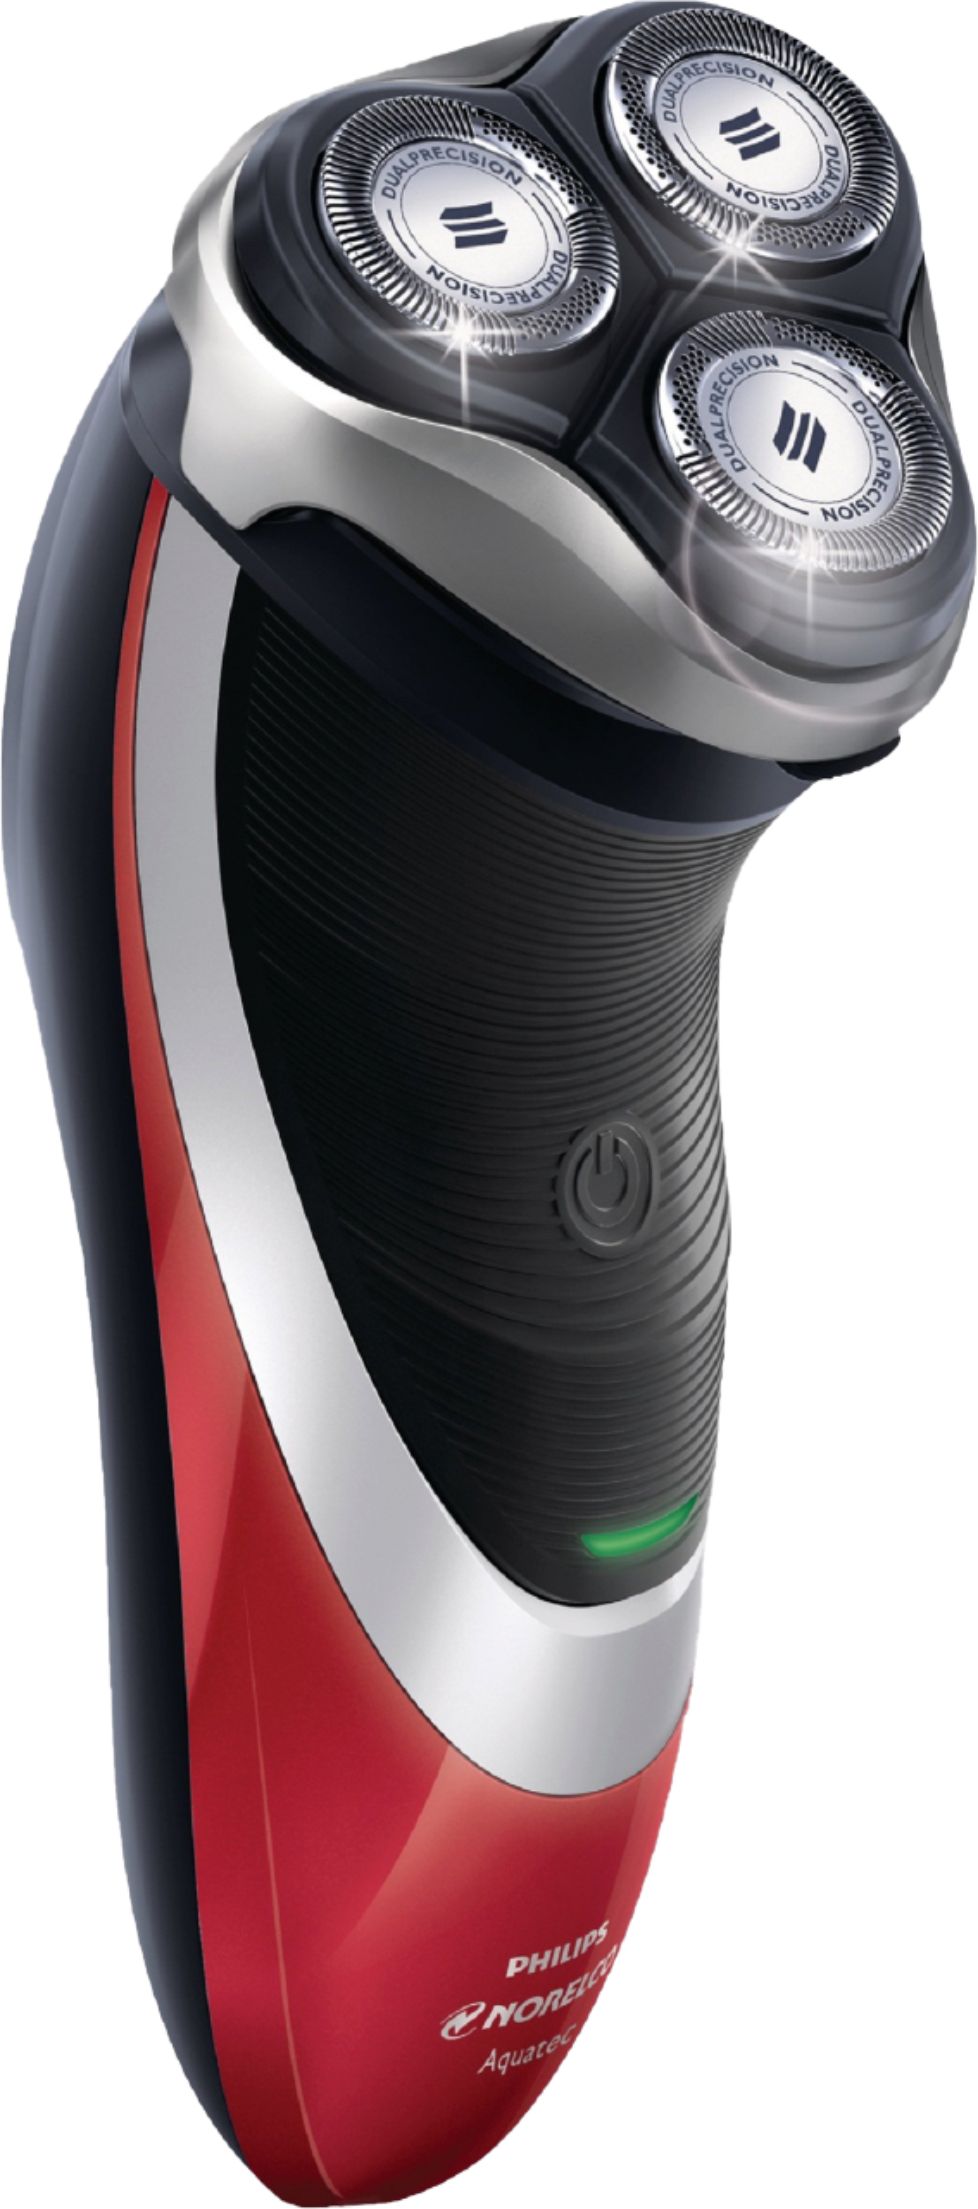 Philips Norelco Beard Trimmer Review 2020